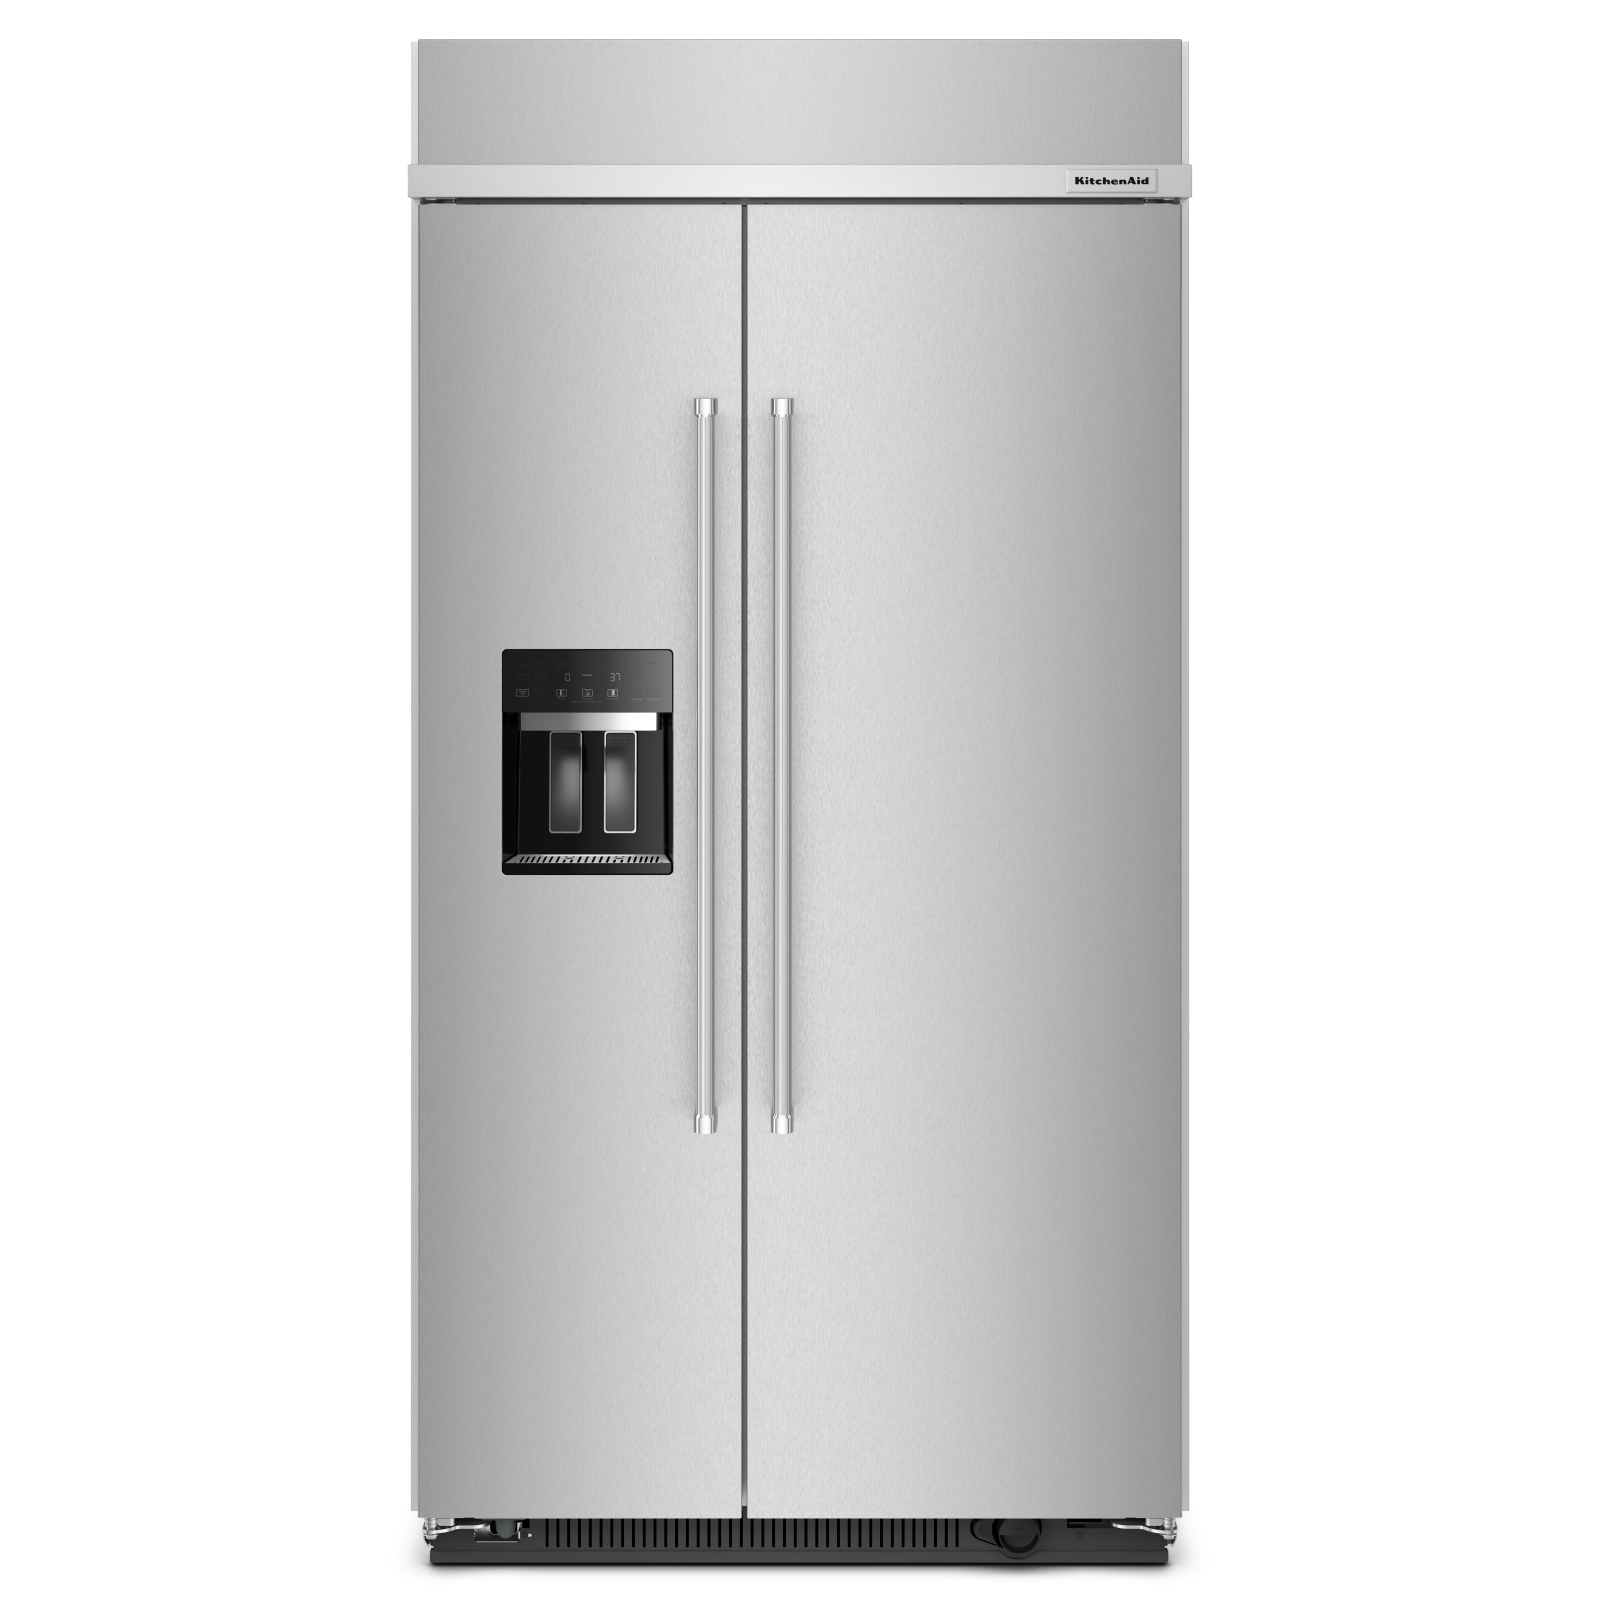 KitchenAid - 41.25 Inch 25.1 cu. ft Side-by-Side Refrigerator in Stainless - KBSD702MSS